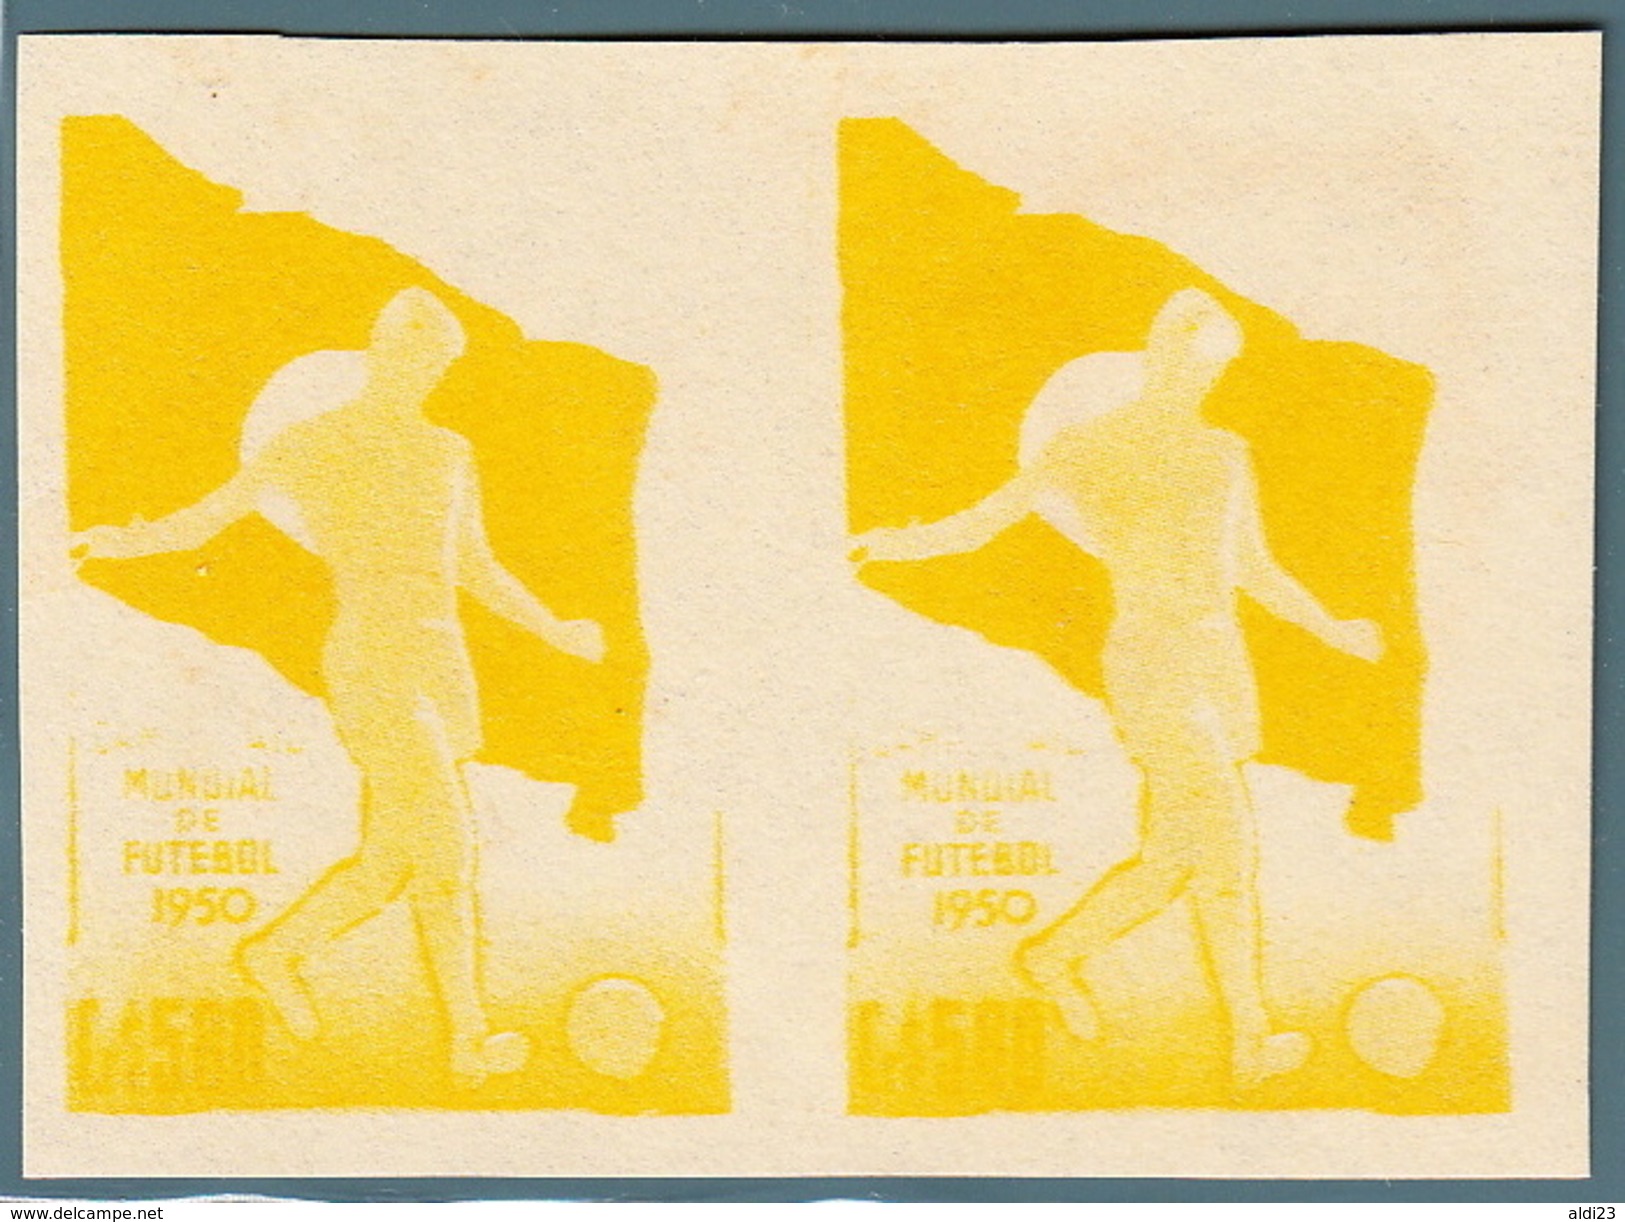 Rare Stamps Of World Cup Soccer Uruguay 1950 - Football Variety Color Brazil. - 1950 – Brazilië